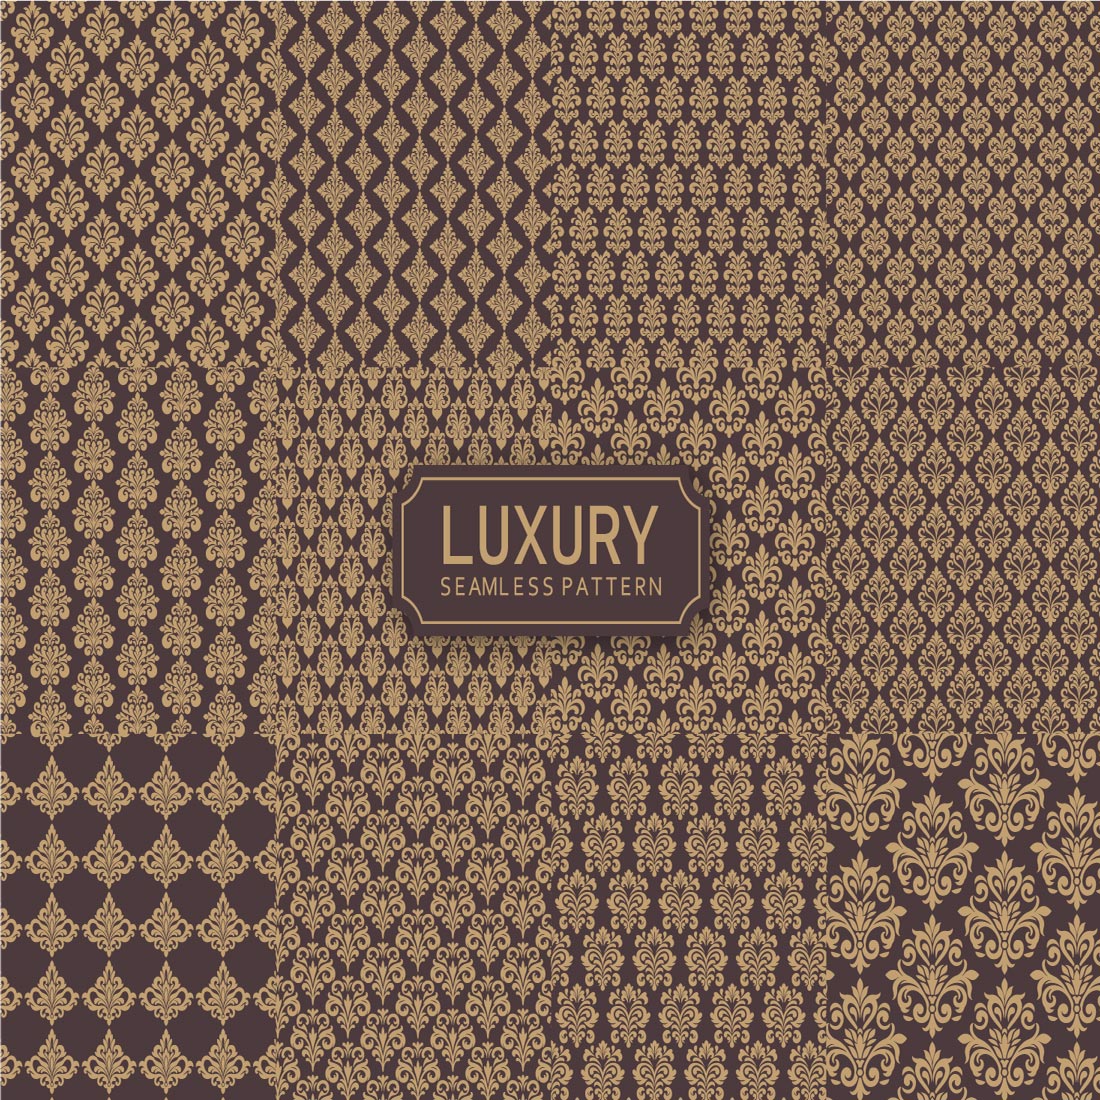 20 geometric seamless luxury pattern preview image.